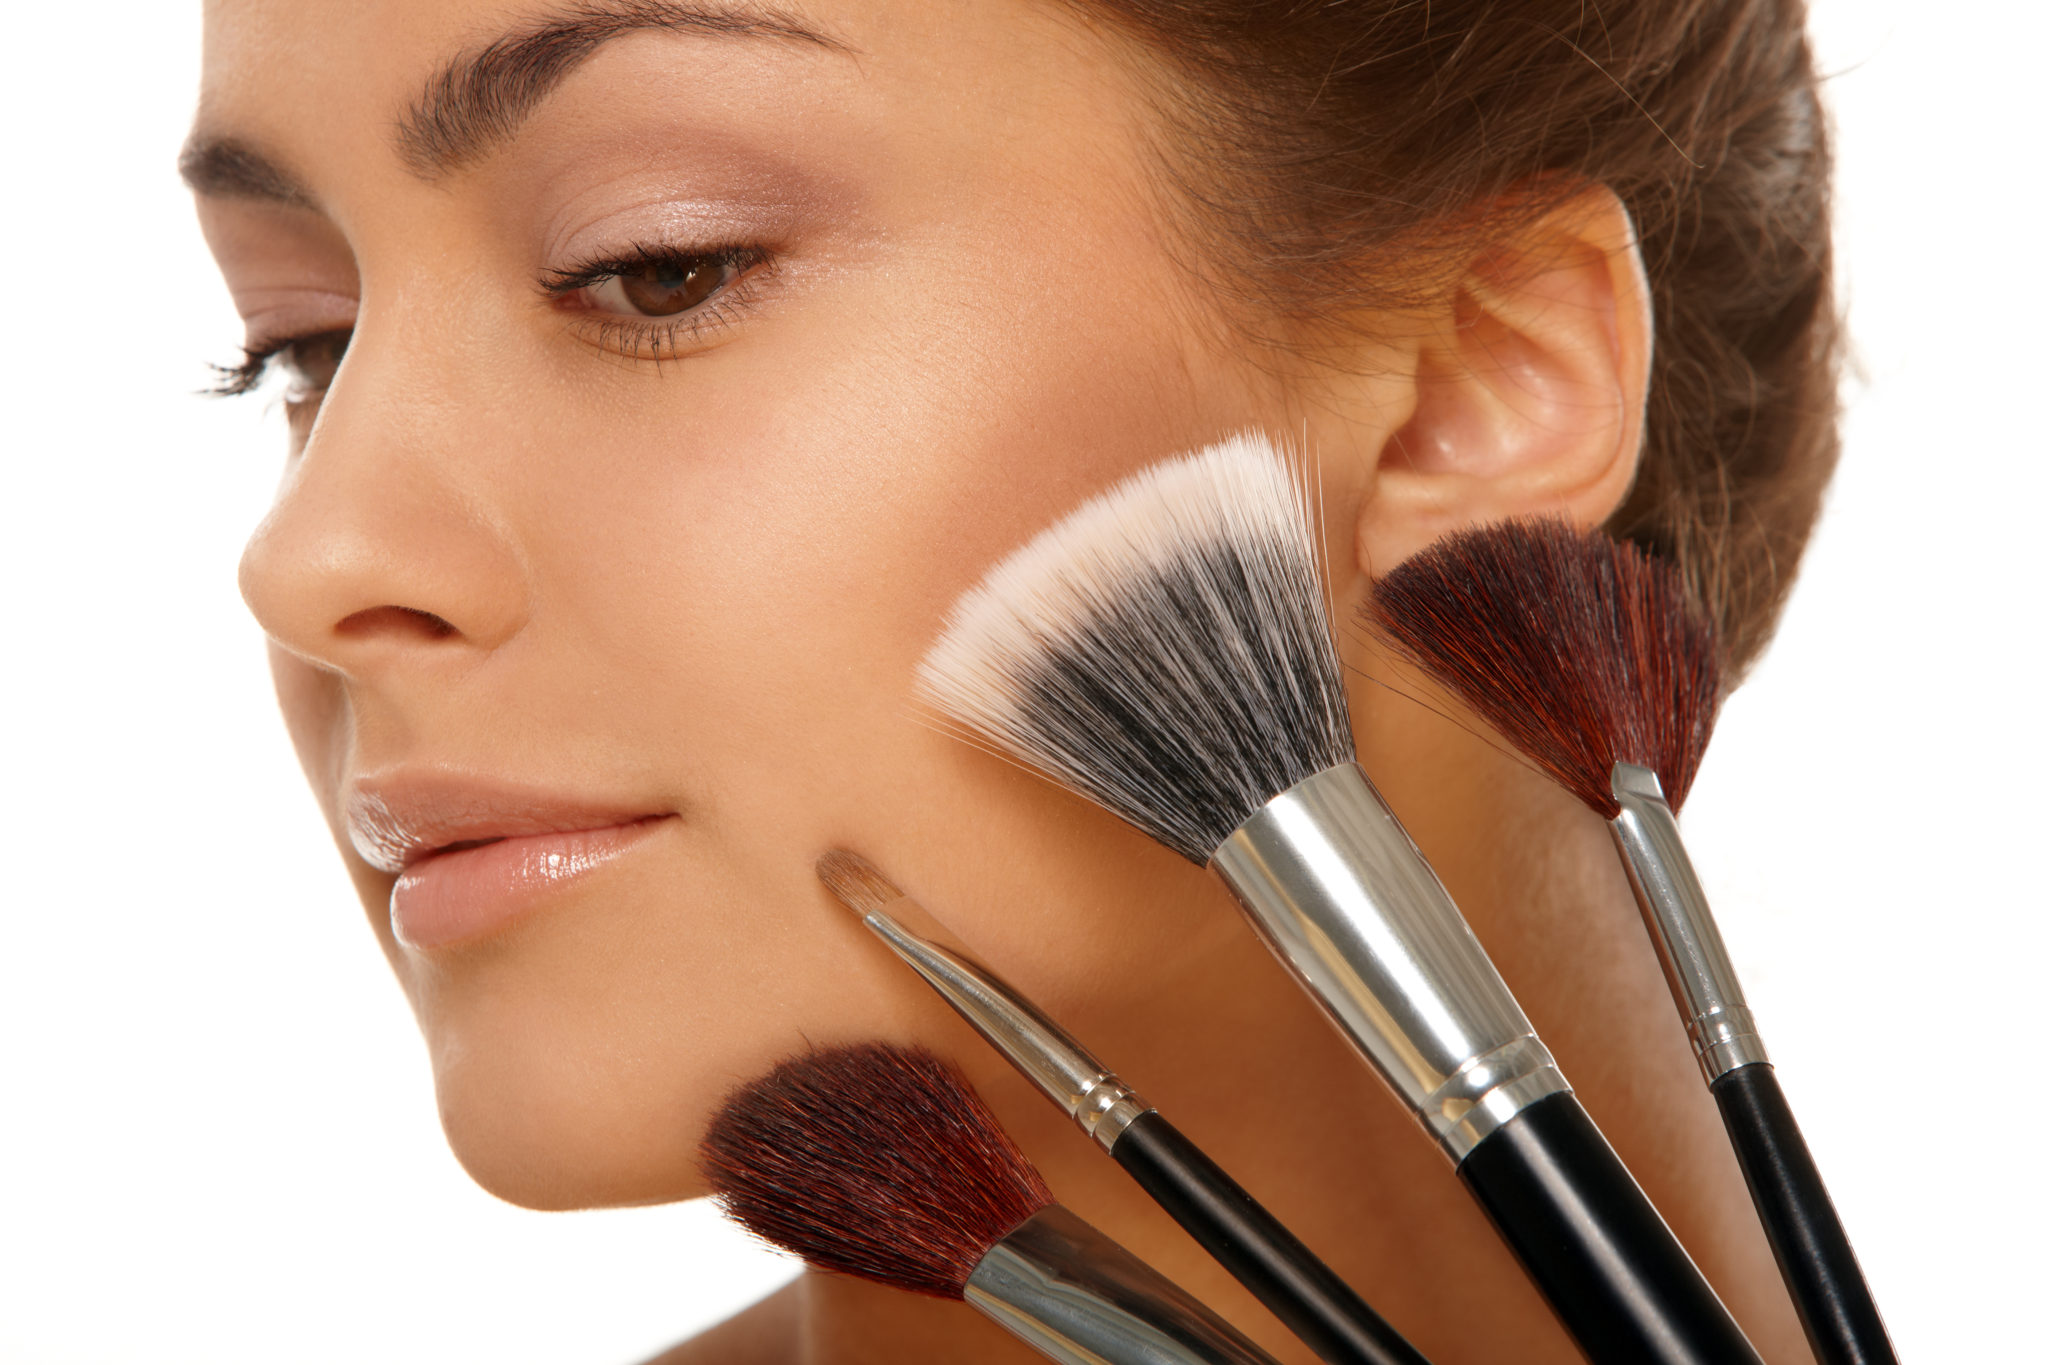 Step-by-Step Guide To Basic Makeup Application For A Rookie | AlphaGirl